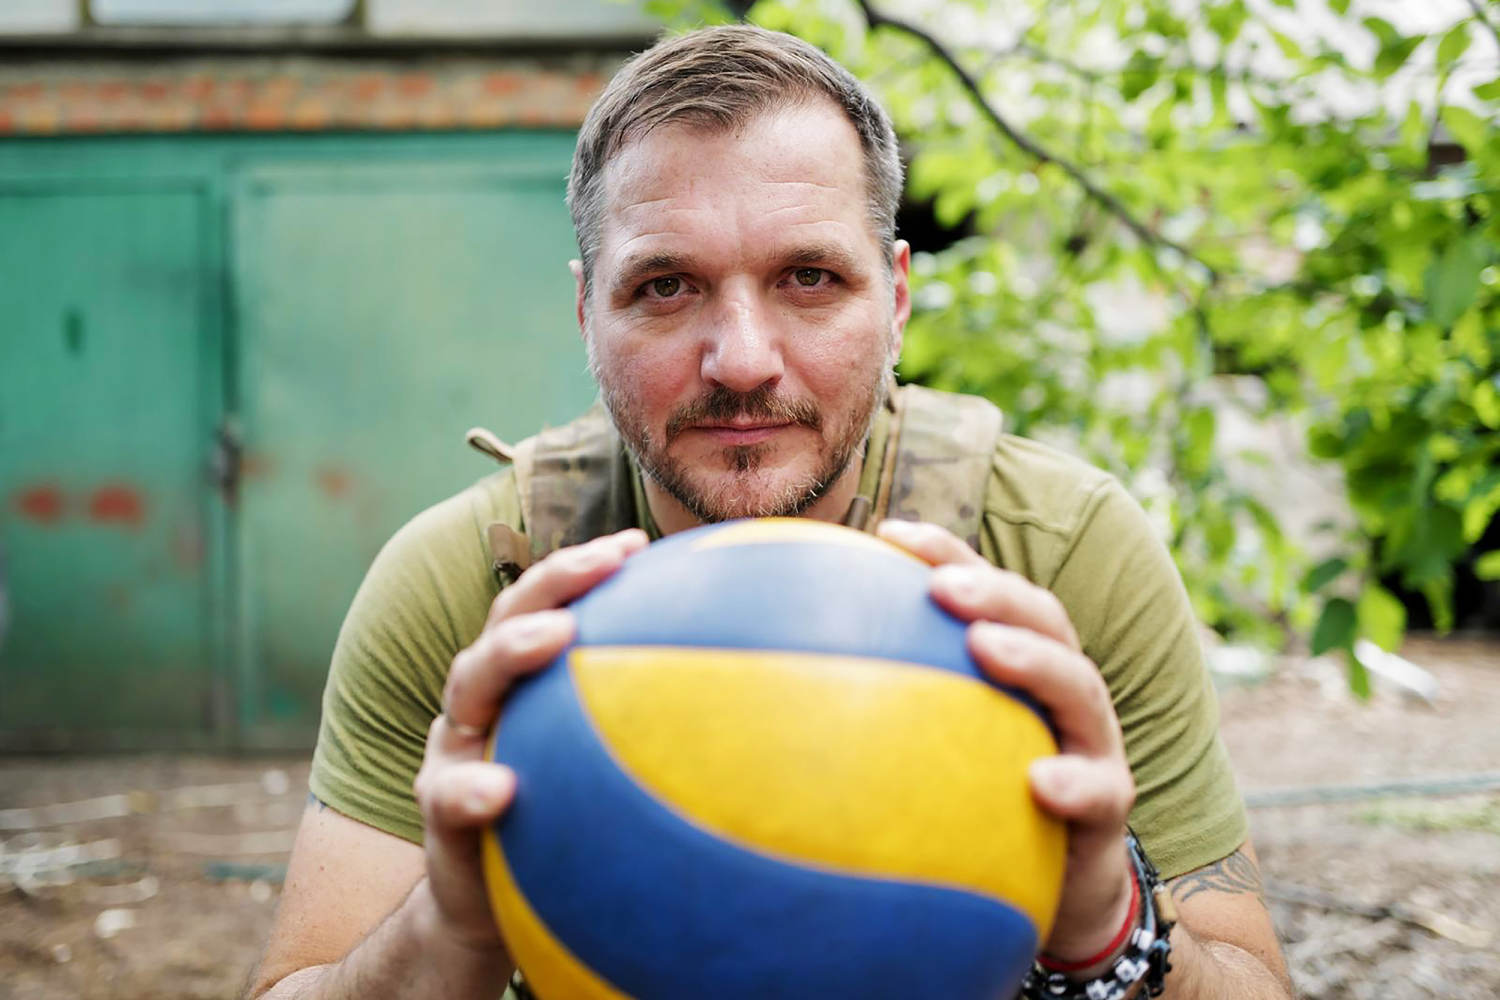 Ukrainian Paralympian practices his volleyball spike when he’s not flying drones over Russian troops